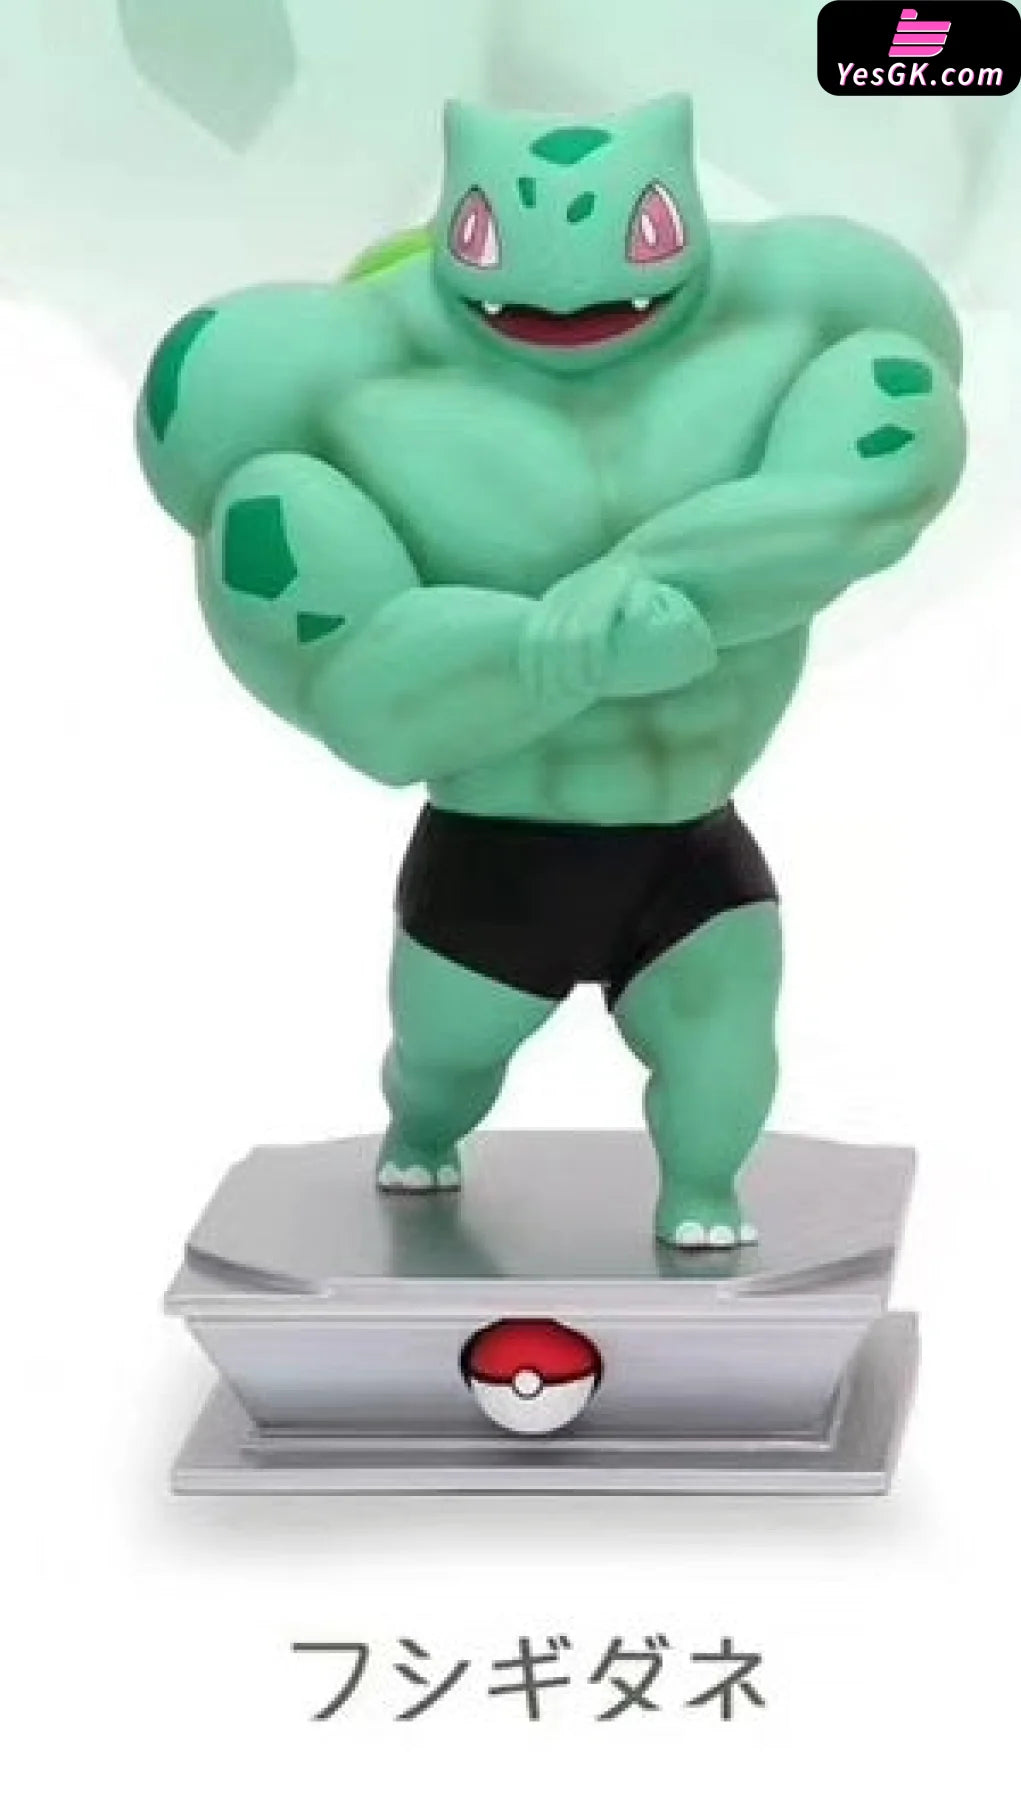 Pokemon - Muscle Show Series Pikachu Charmander Squirtle & Bulbasaur Resin Statue Go Studio [In